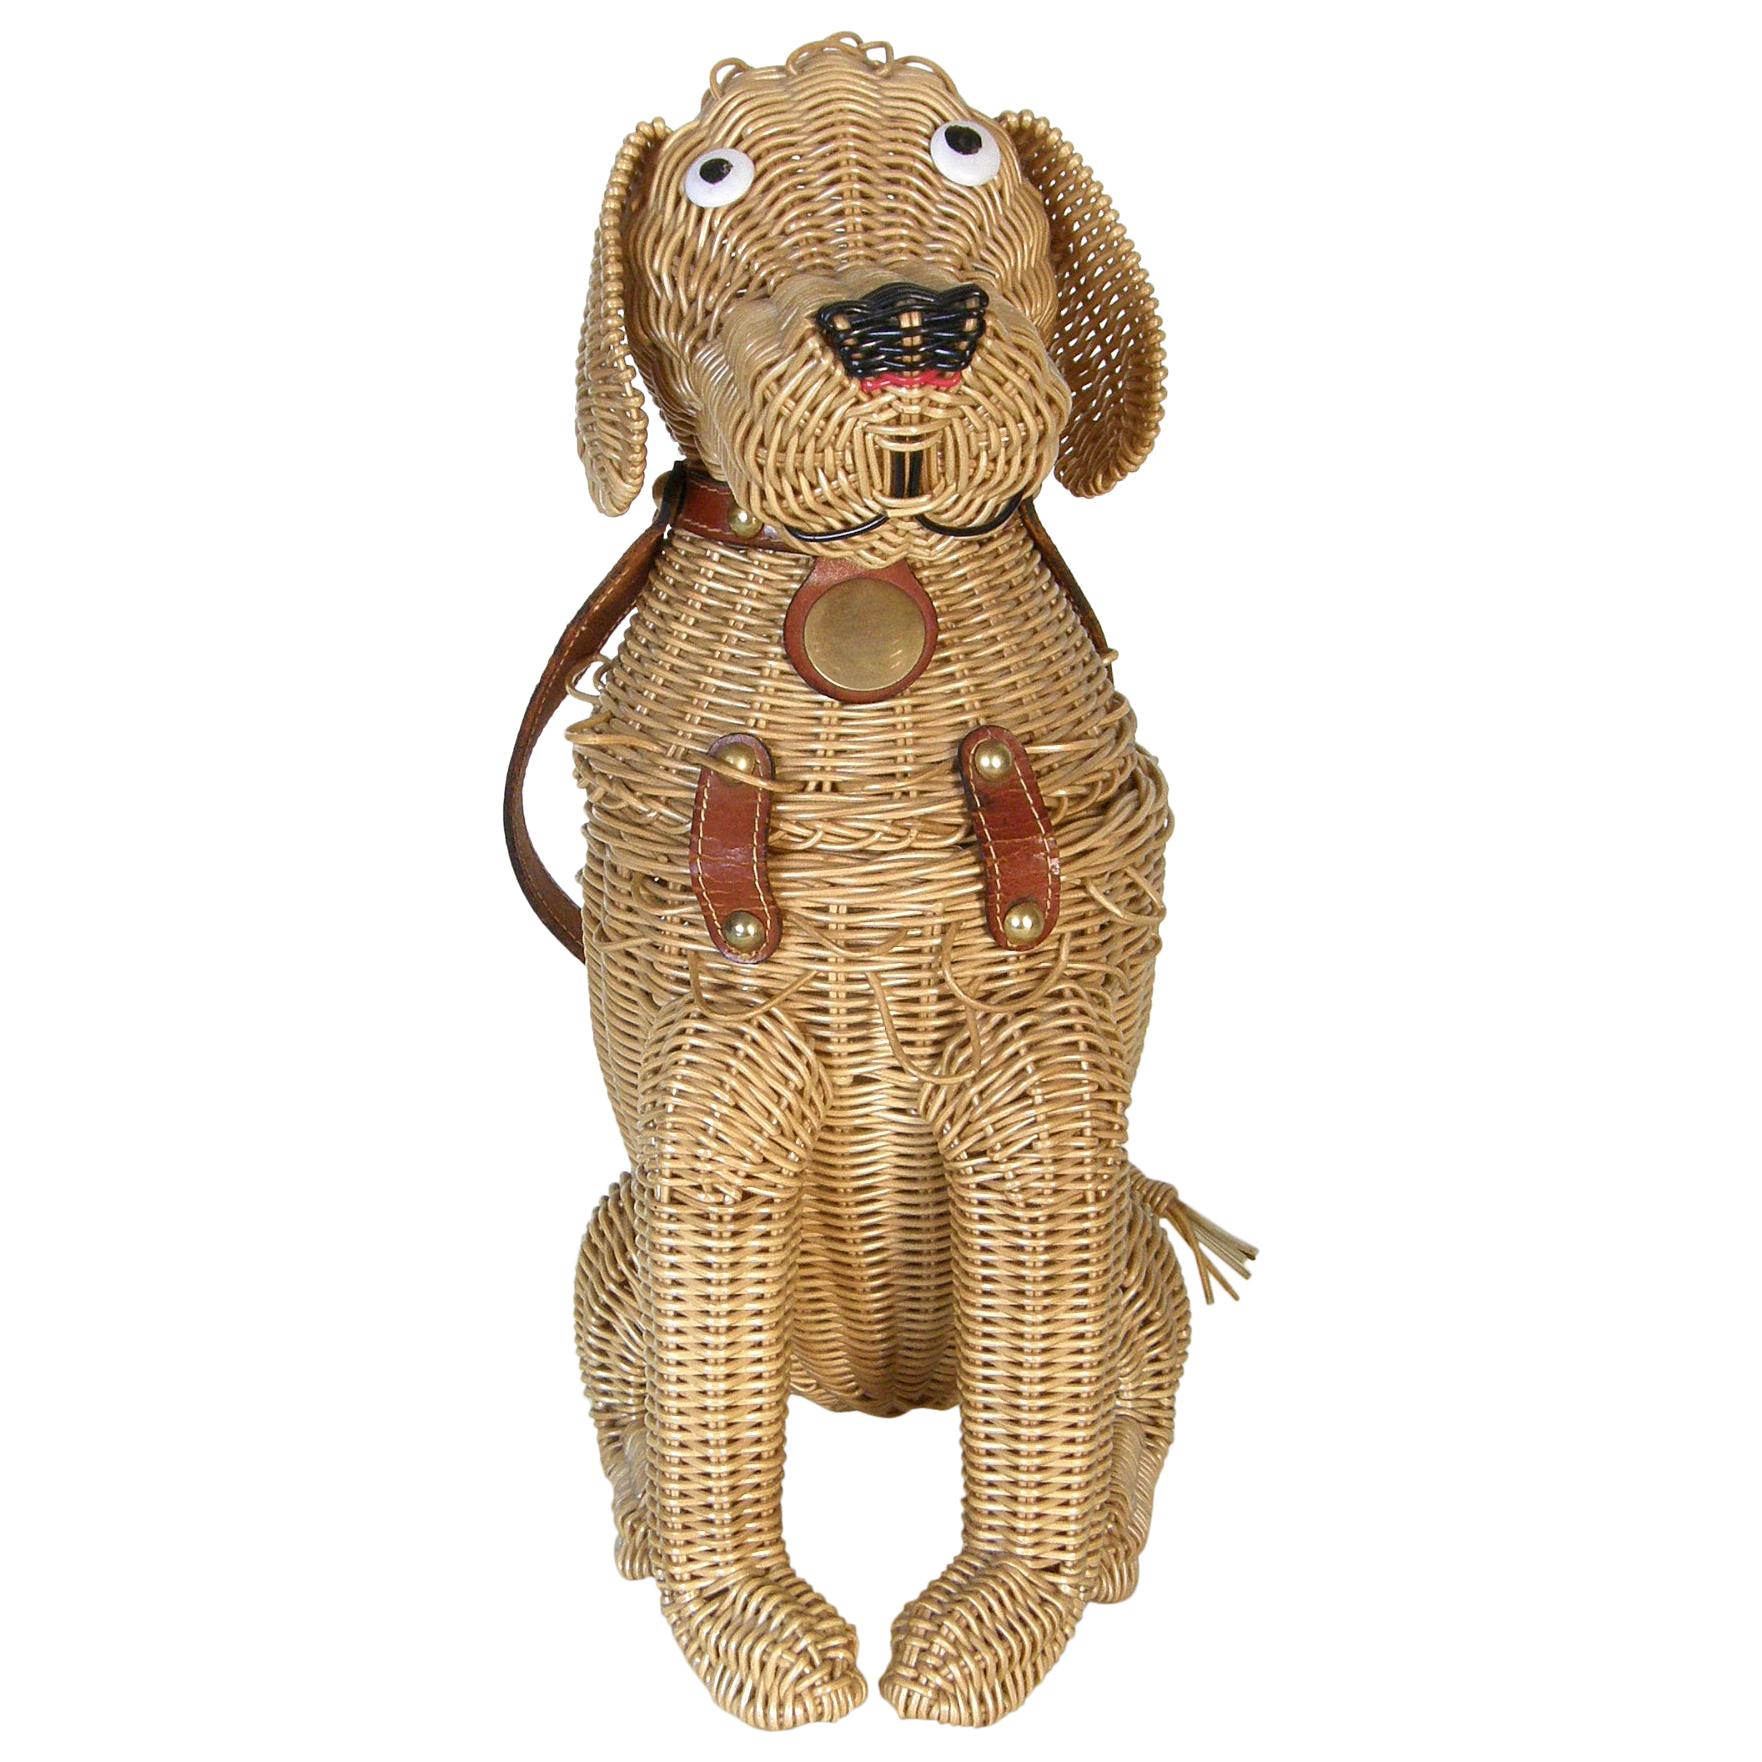 Wicker Dog Handbag by Marcus Brothers with Leather Harness and Studded Collar